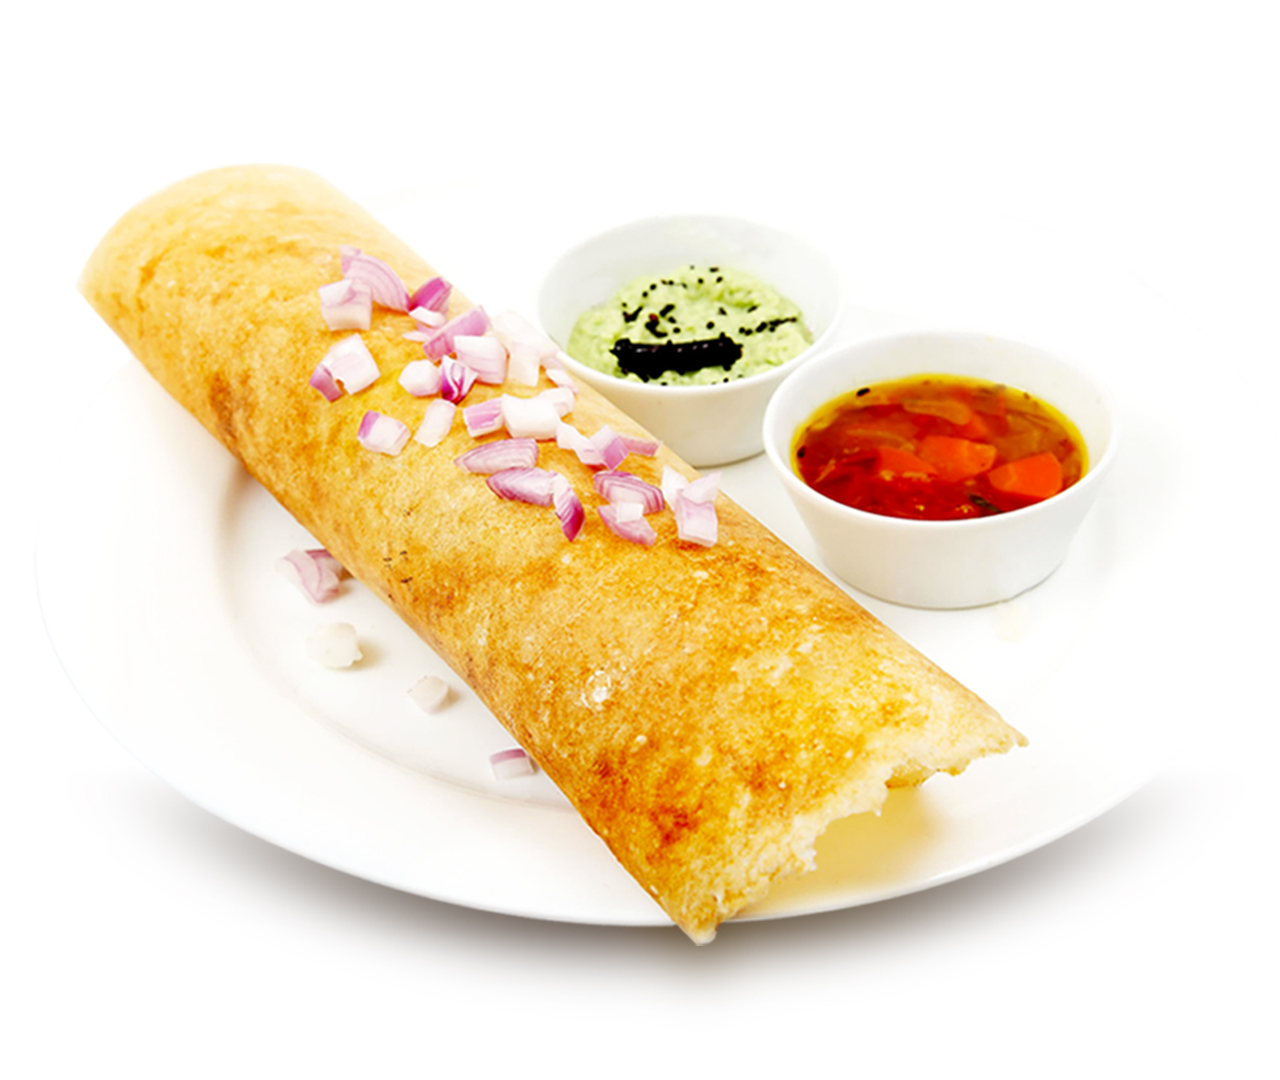 Steps by steps making Dosai